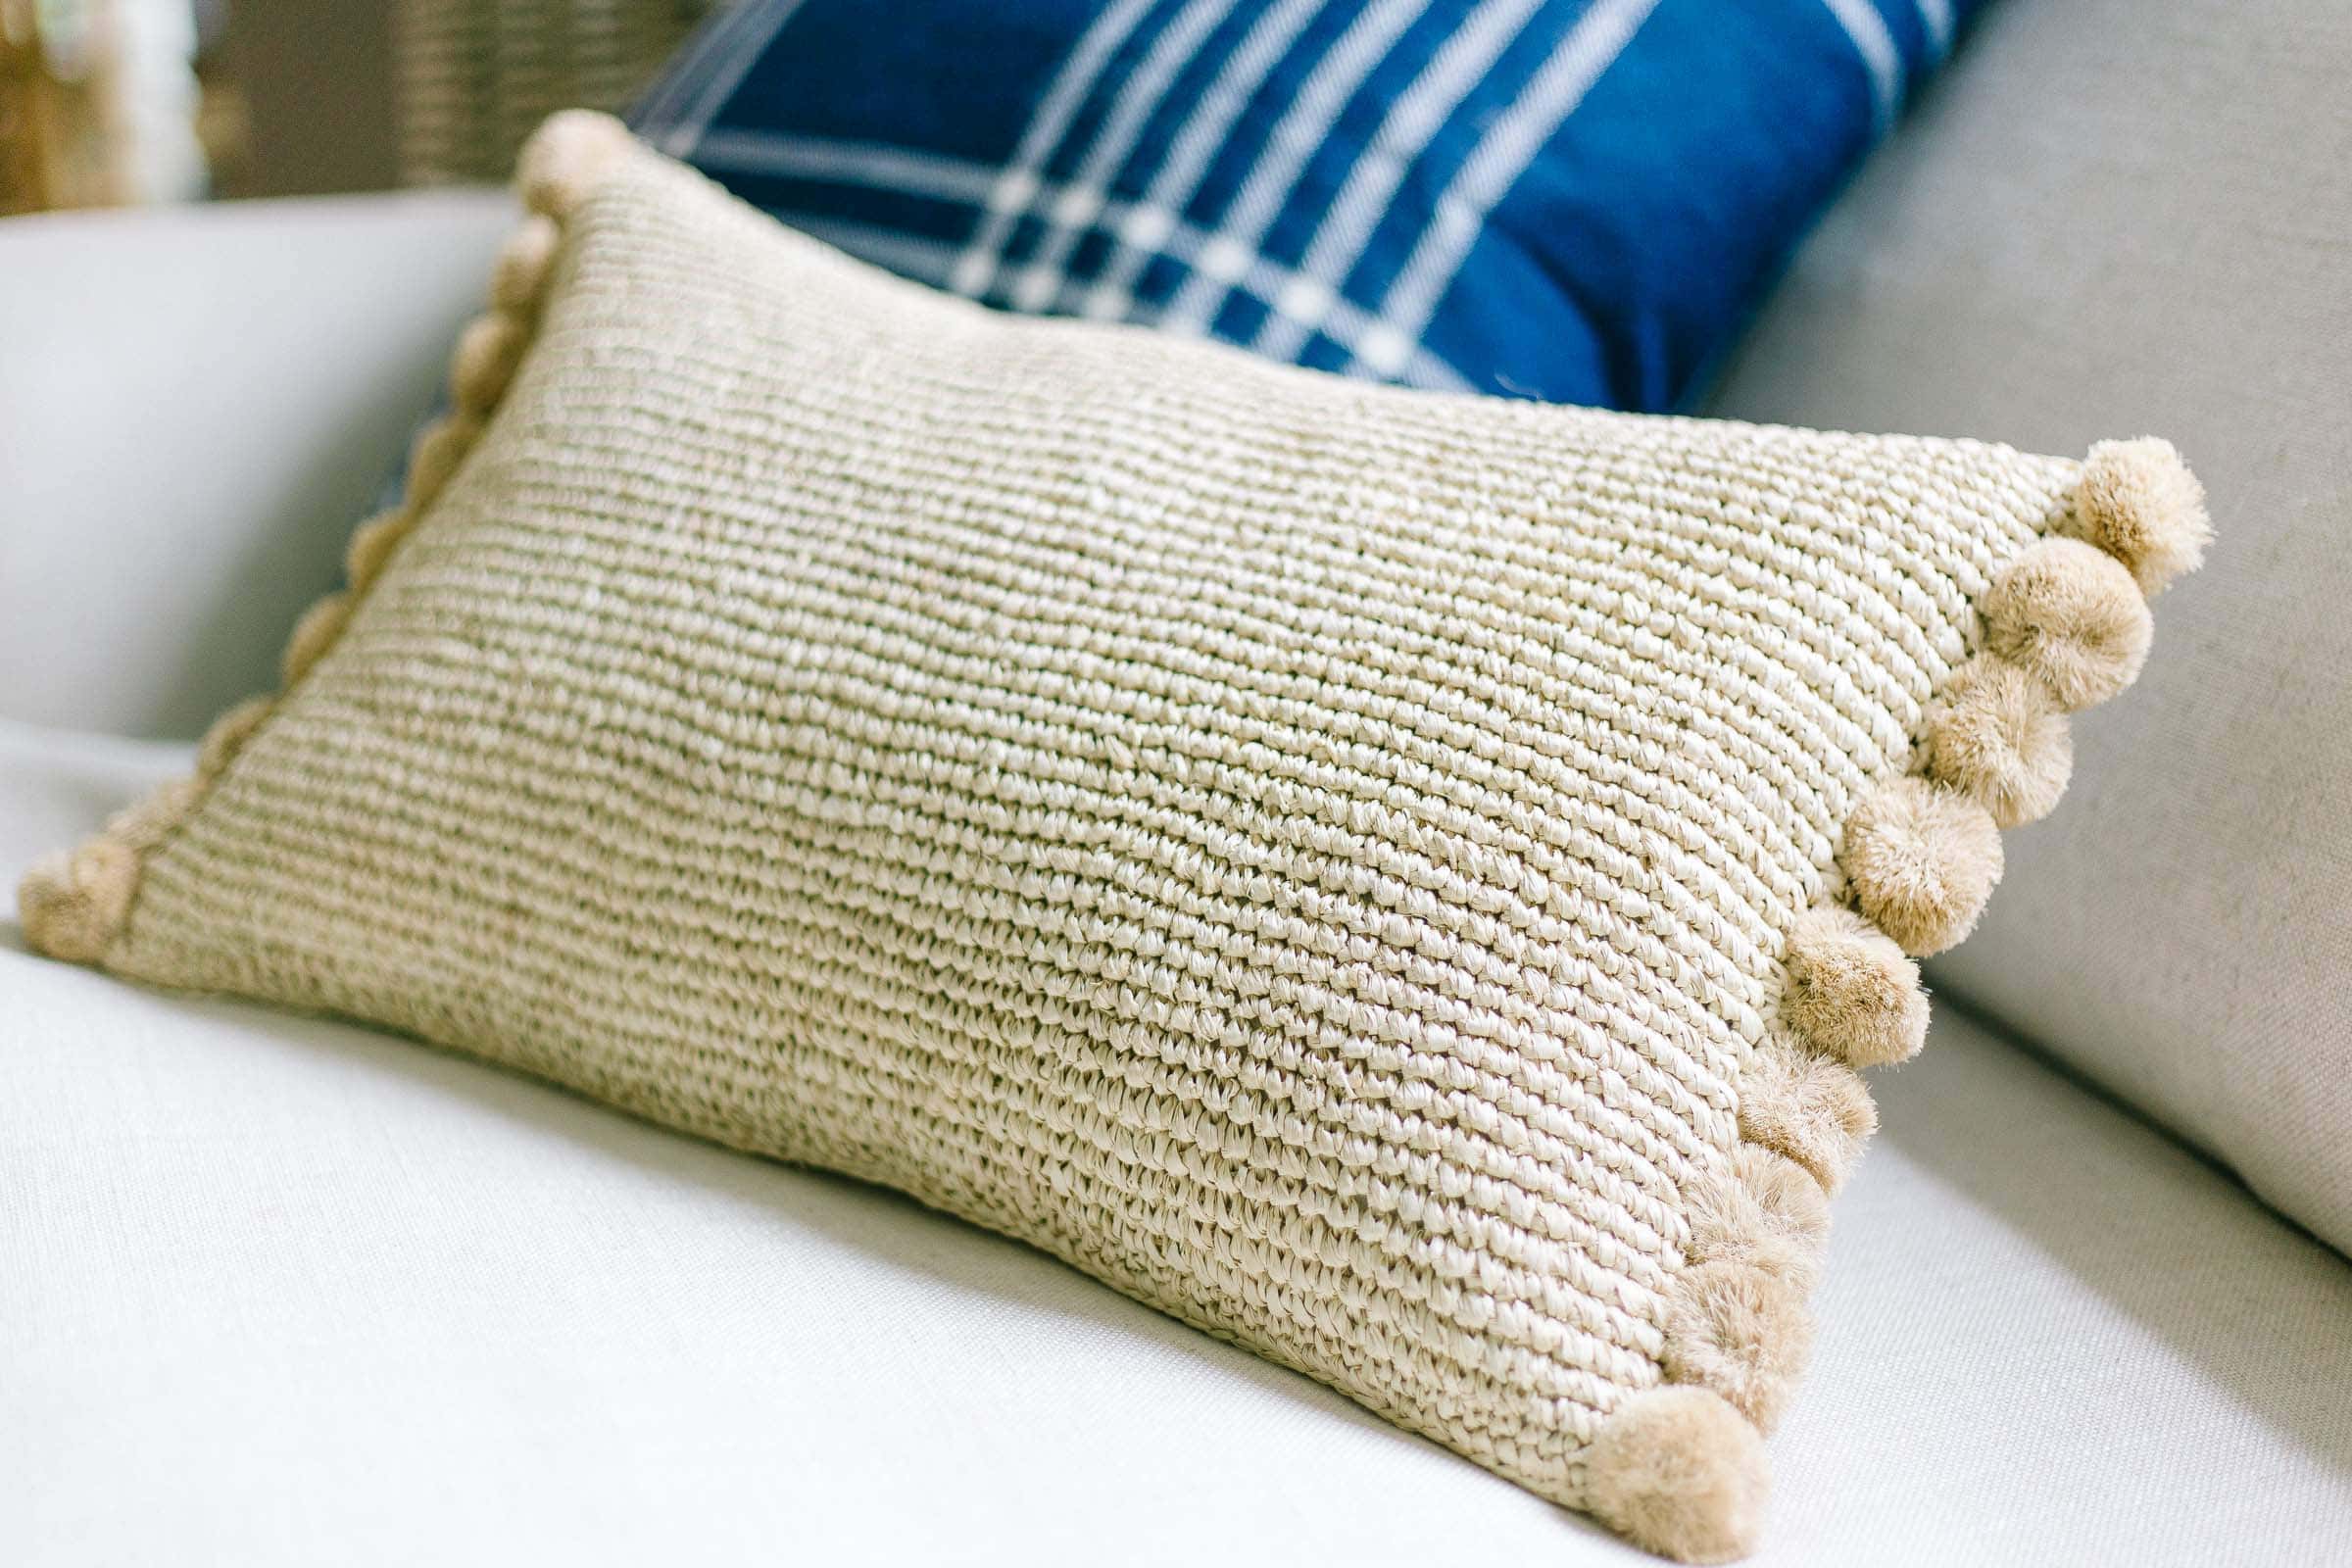 woven raffia pillow from Serena and Lily